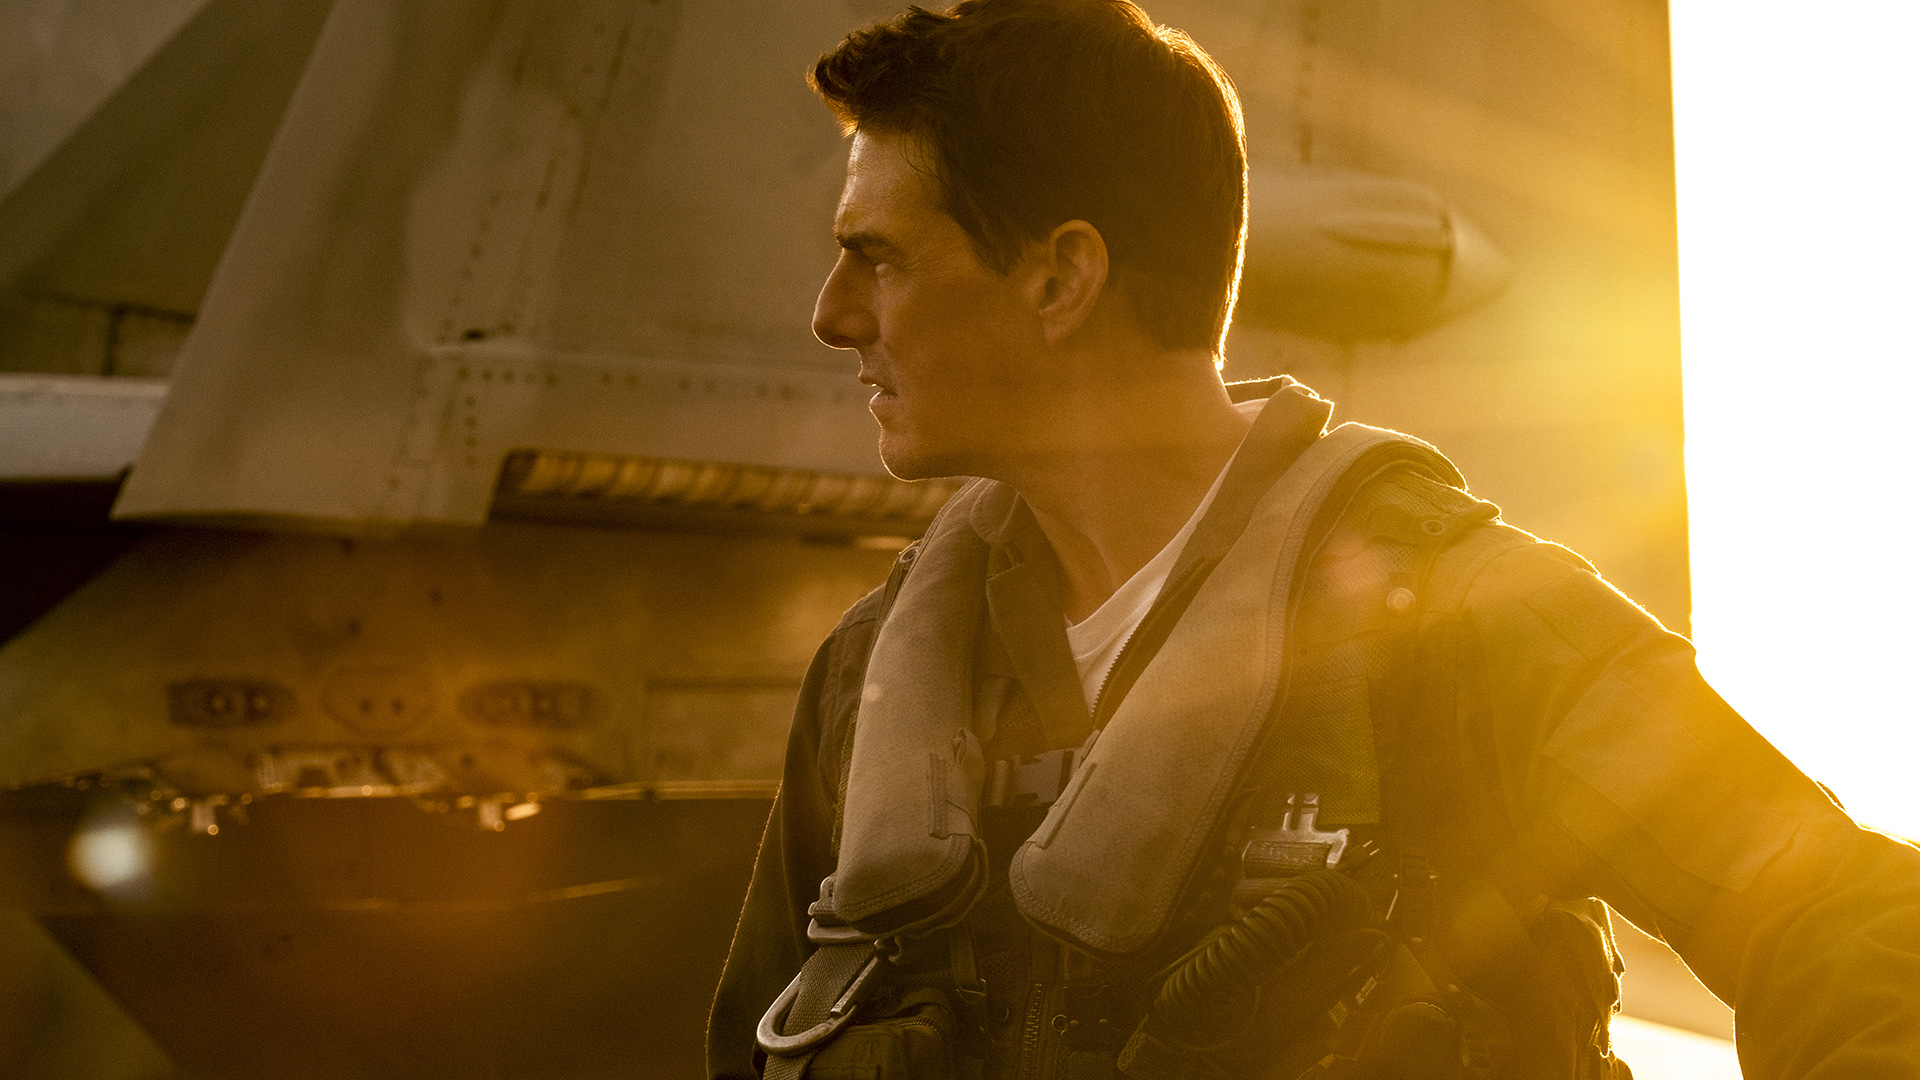 Tom Cruise returns as Maverick in these exclusive image from the Top Gun sequel